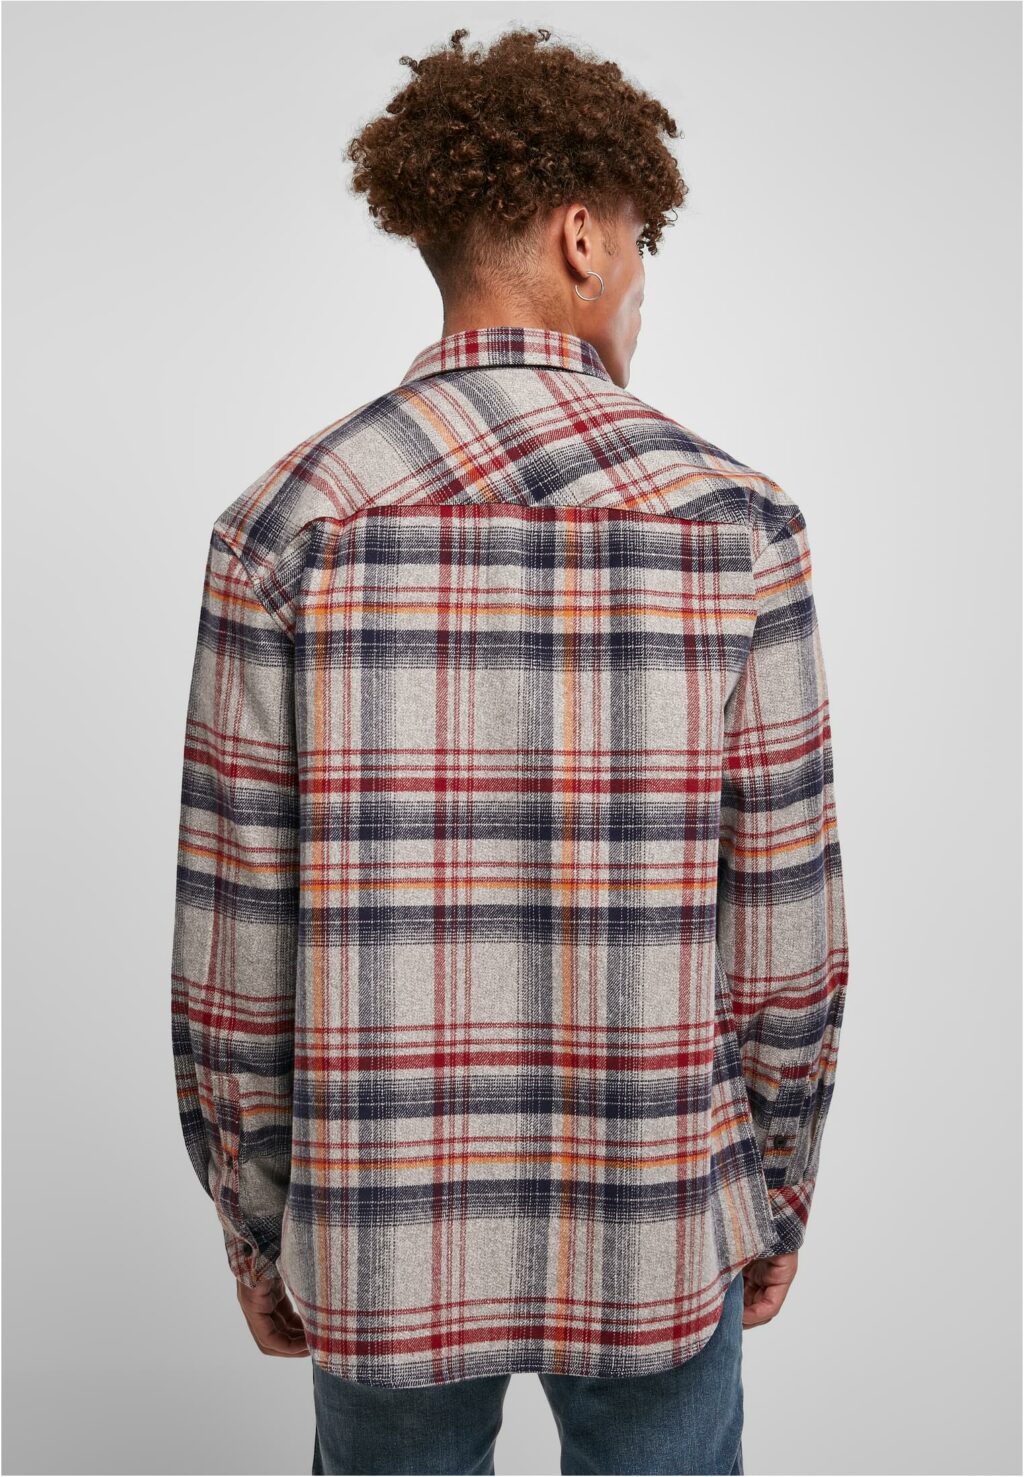 Urban Classics Heavy Curved Oversized Checked Shirt grey/red TB4696